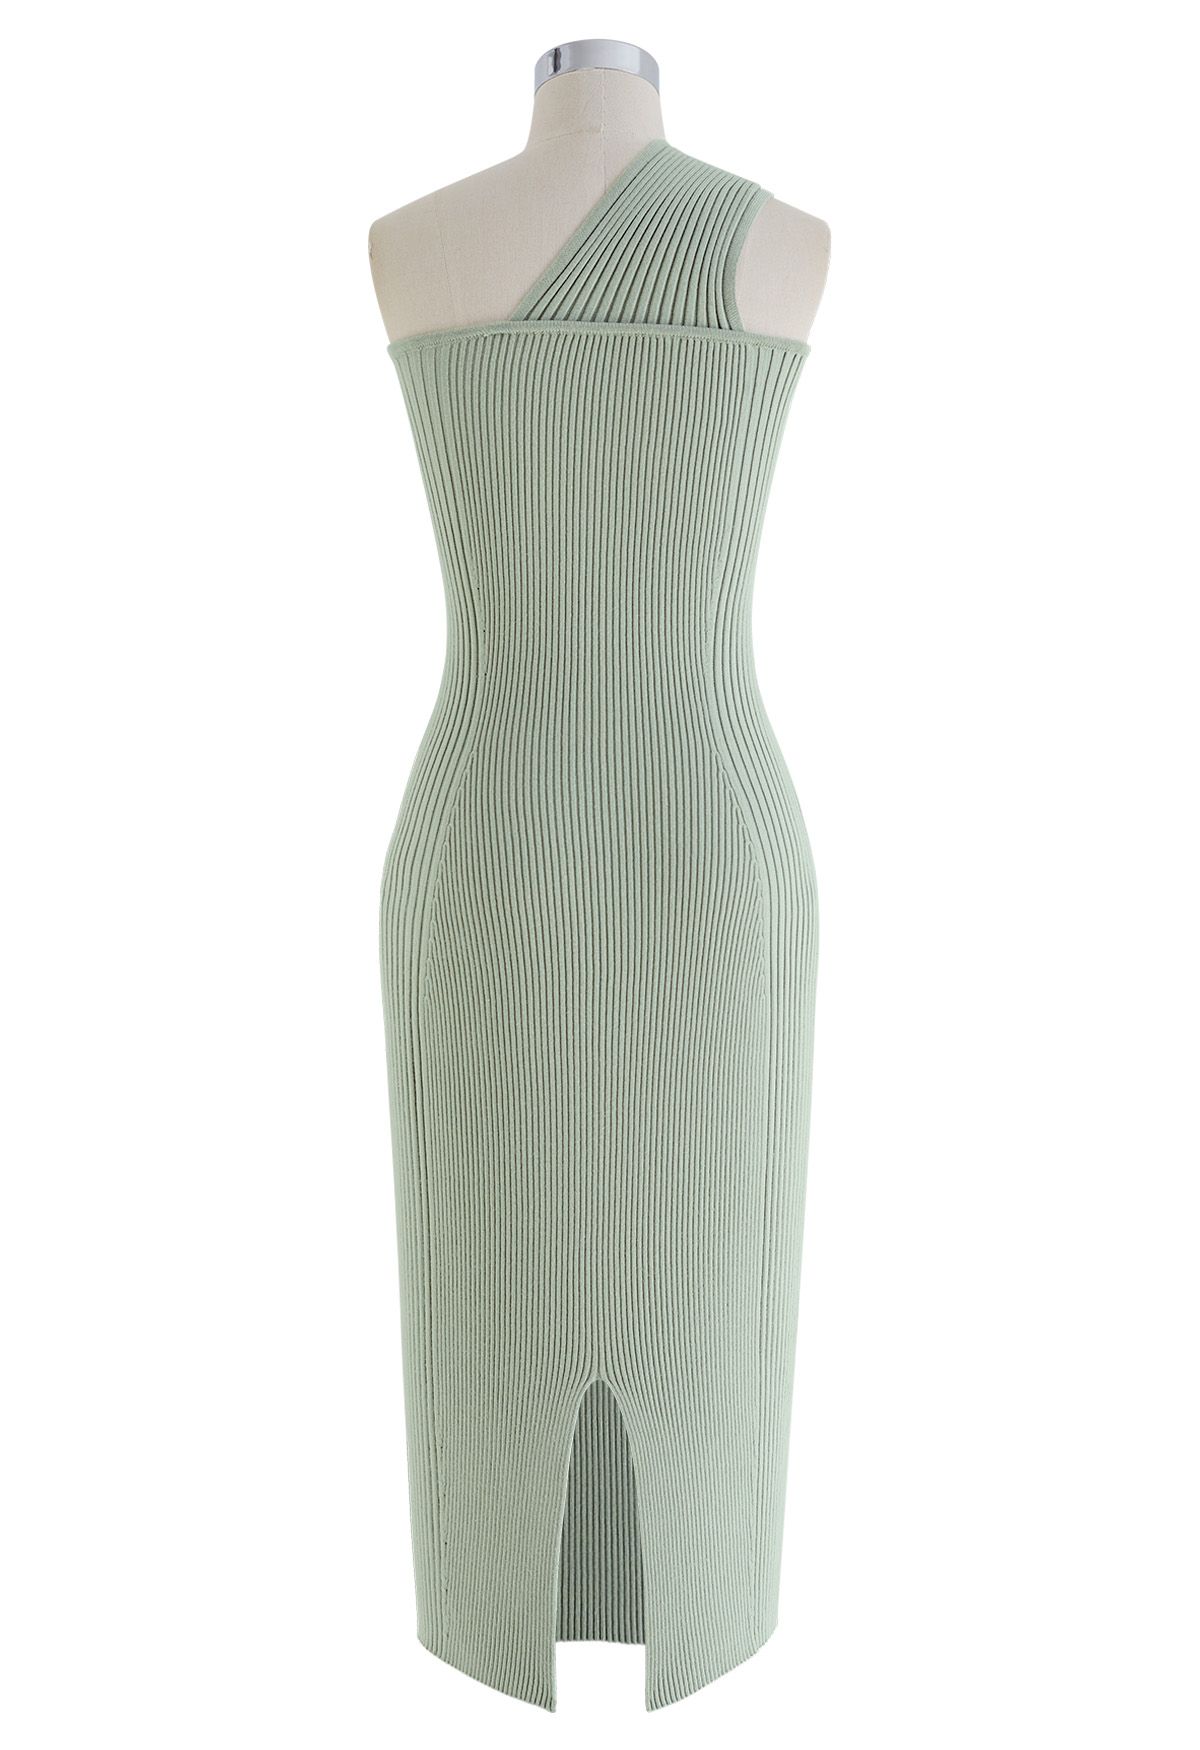 One-Shoulder Knotted Bodycon Knit Dress in Pea Green